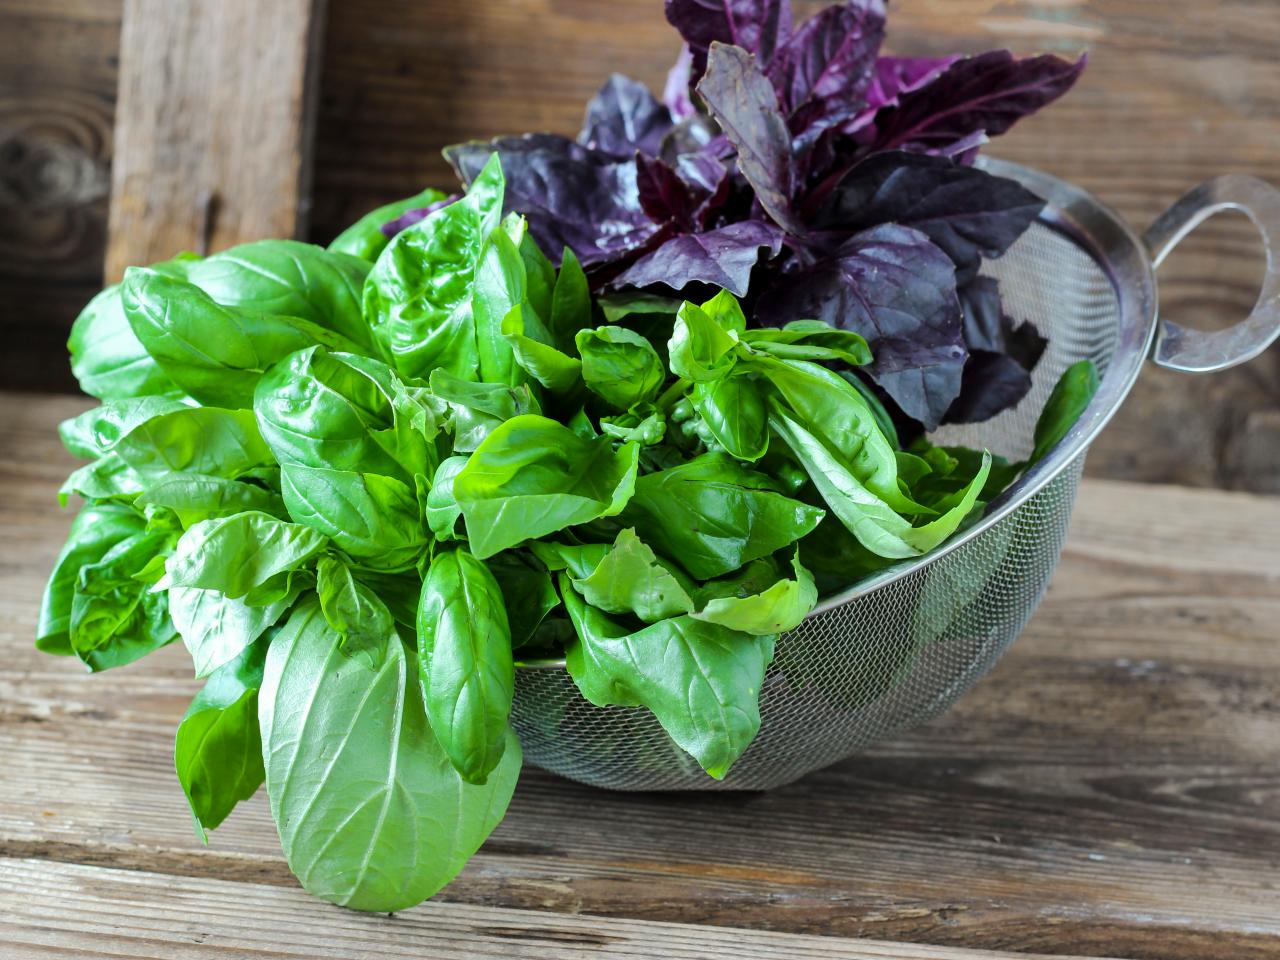 We Tried 5 Methods for Storing Herbs and Found a Clear Winner